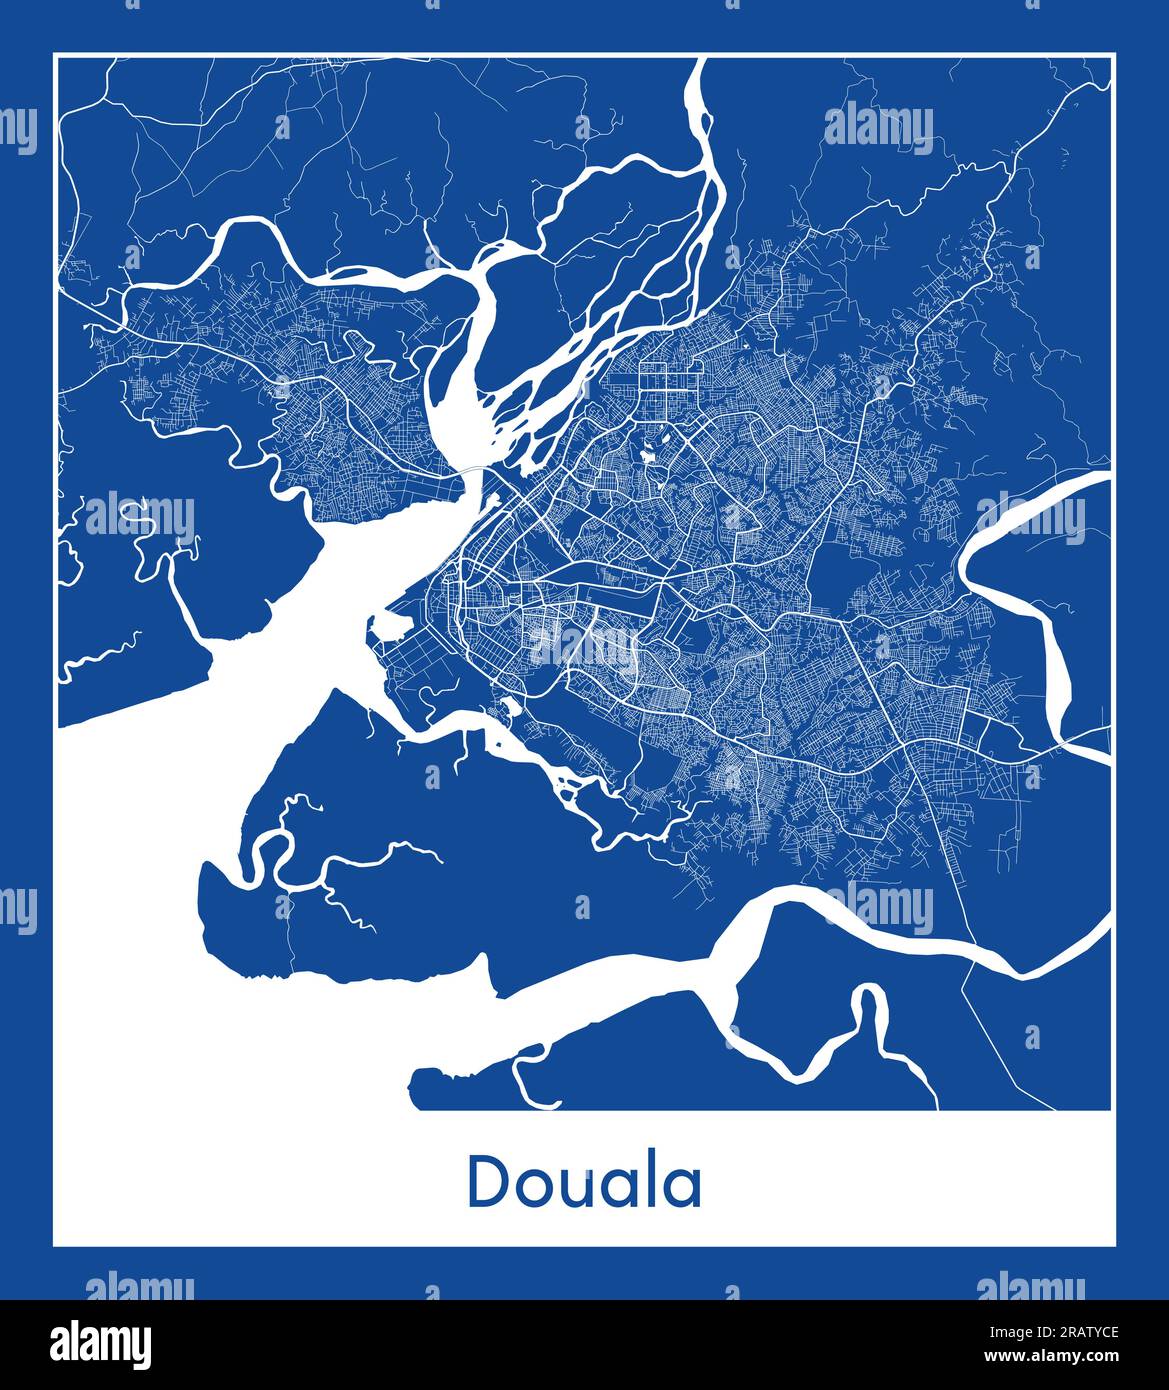 Douala Cameroon Africa City map blue print vector illustration Stock Vector